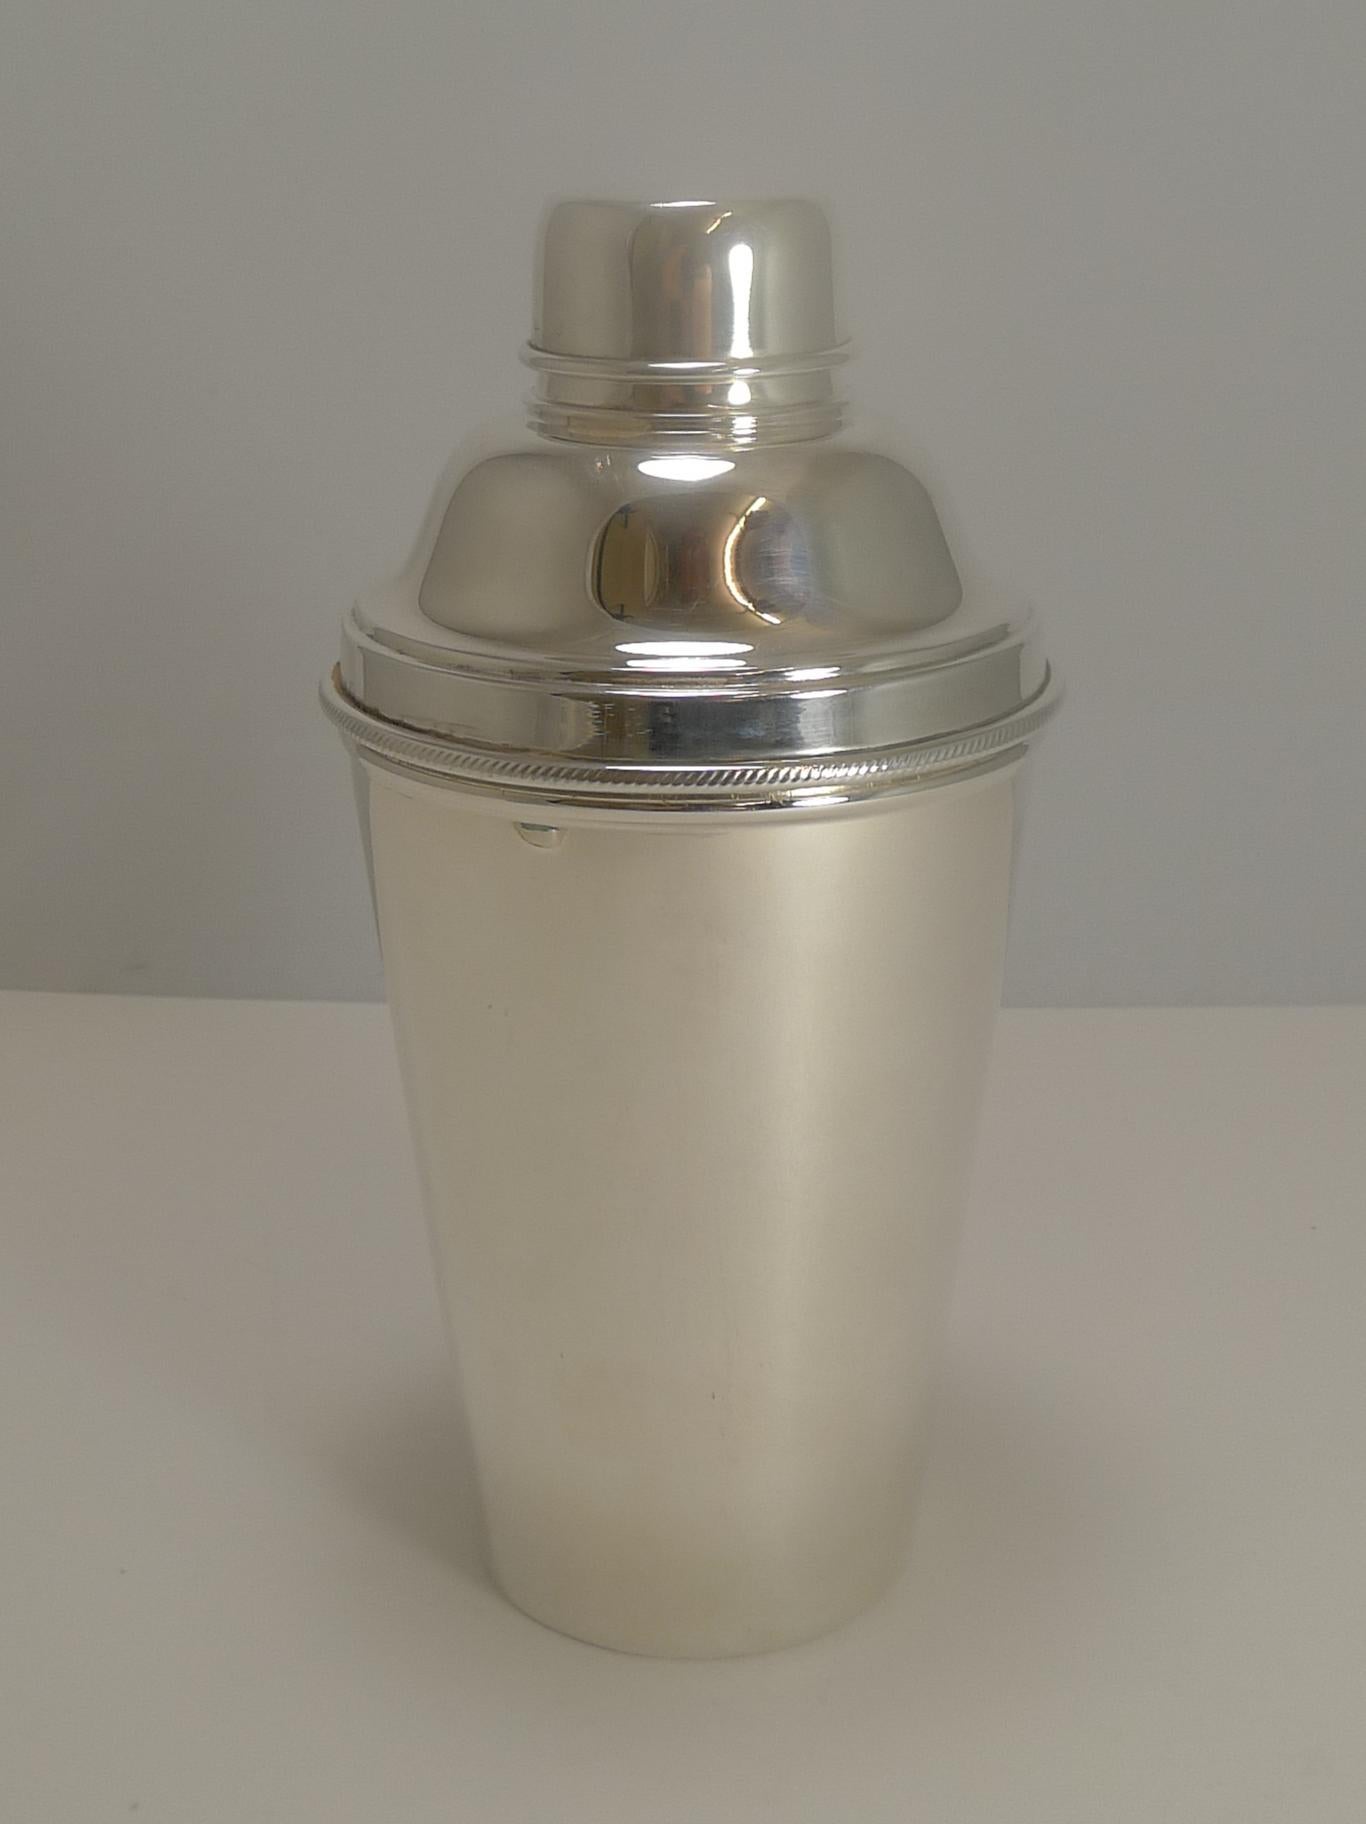 A fine large Art Deco cocktail shaker made from EPNS (Electro-plated nickel silver).

These examples are hard to find with the addition of an integrated lemon squeezer within the top; highly sought-after.

This one has to be one of the best we